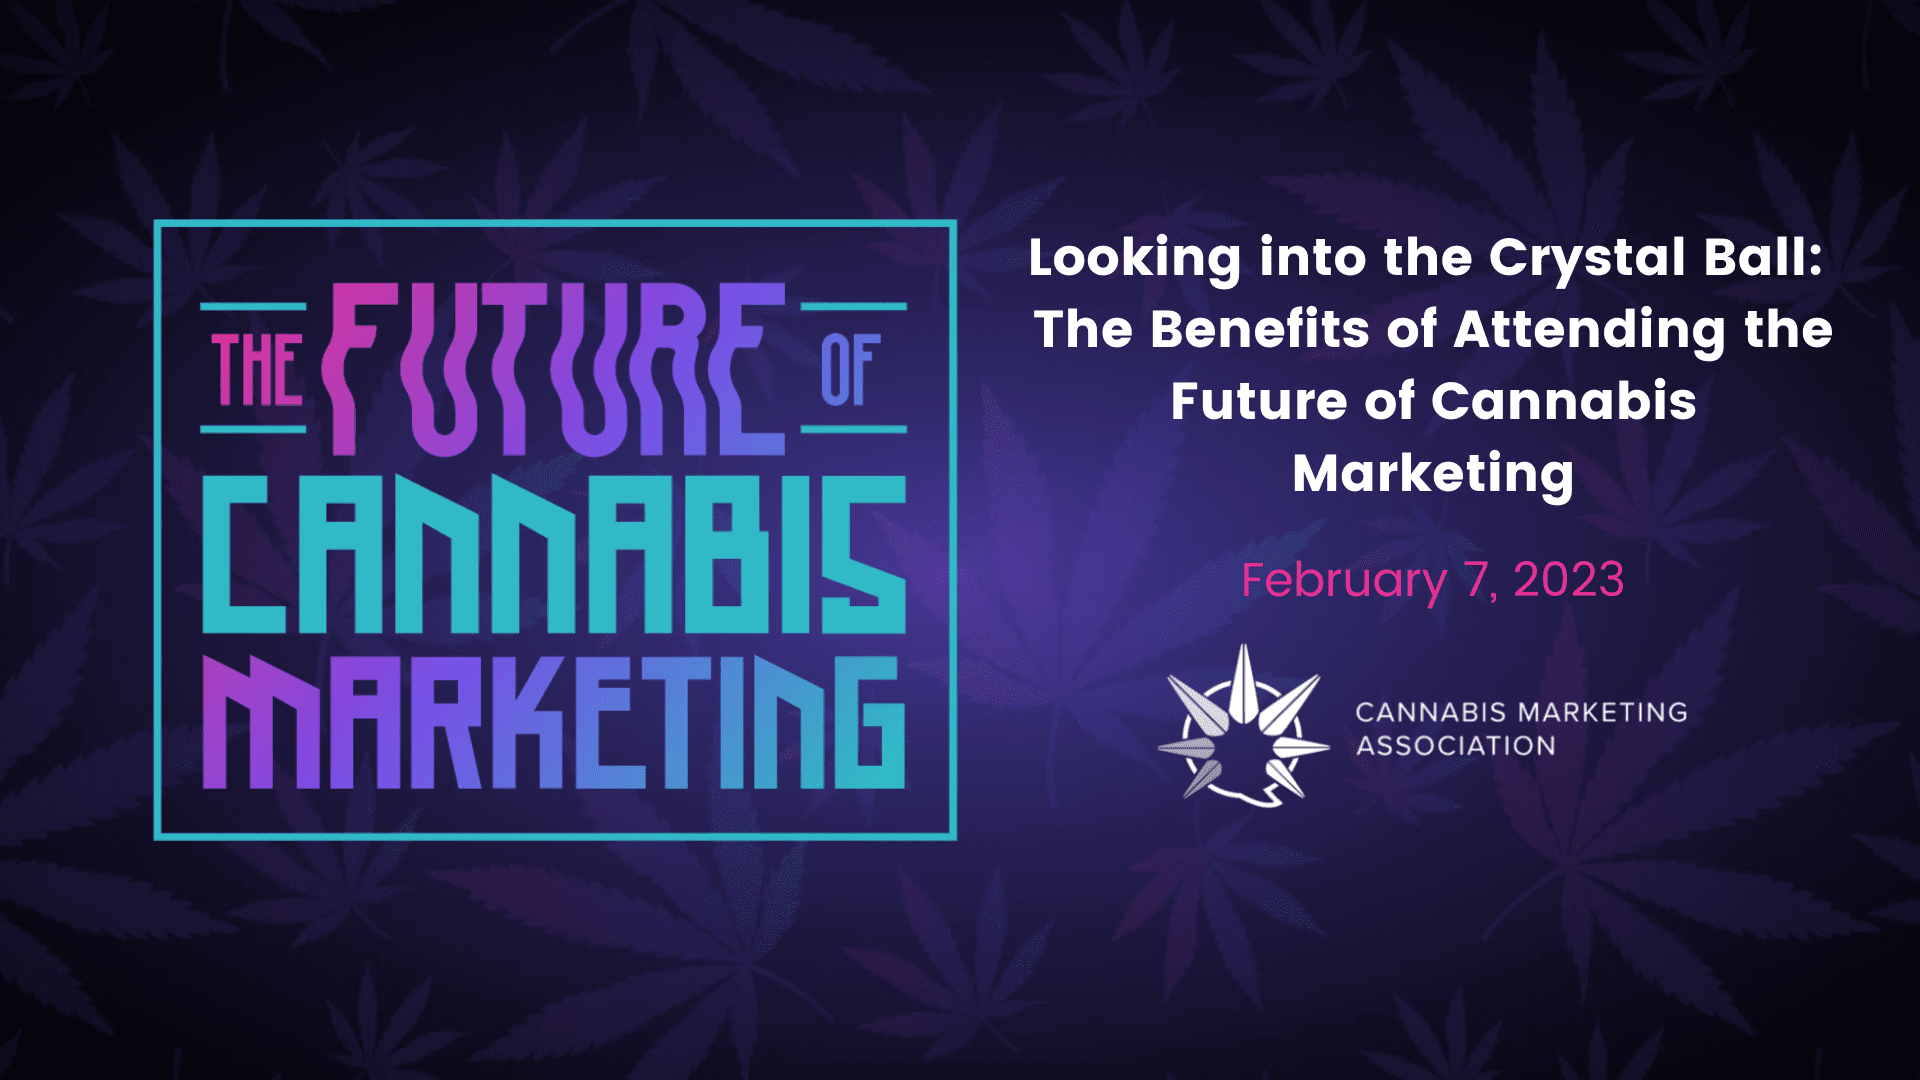 Looking into the Crystal Ball: The Benefits of Attending the Future of Cannabis Marketing